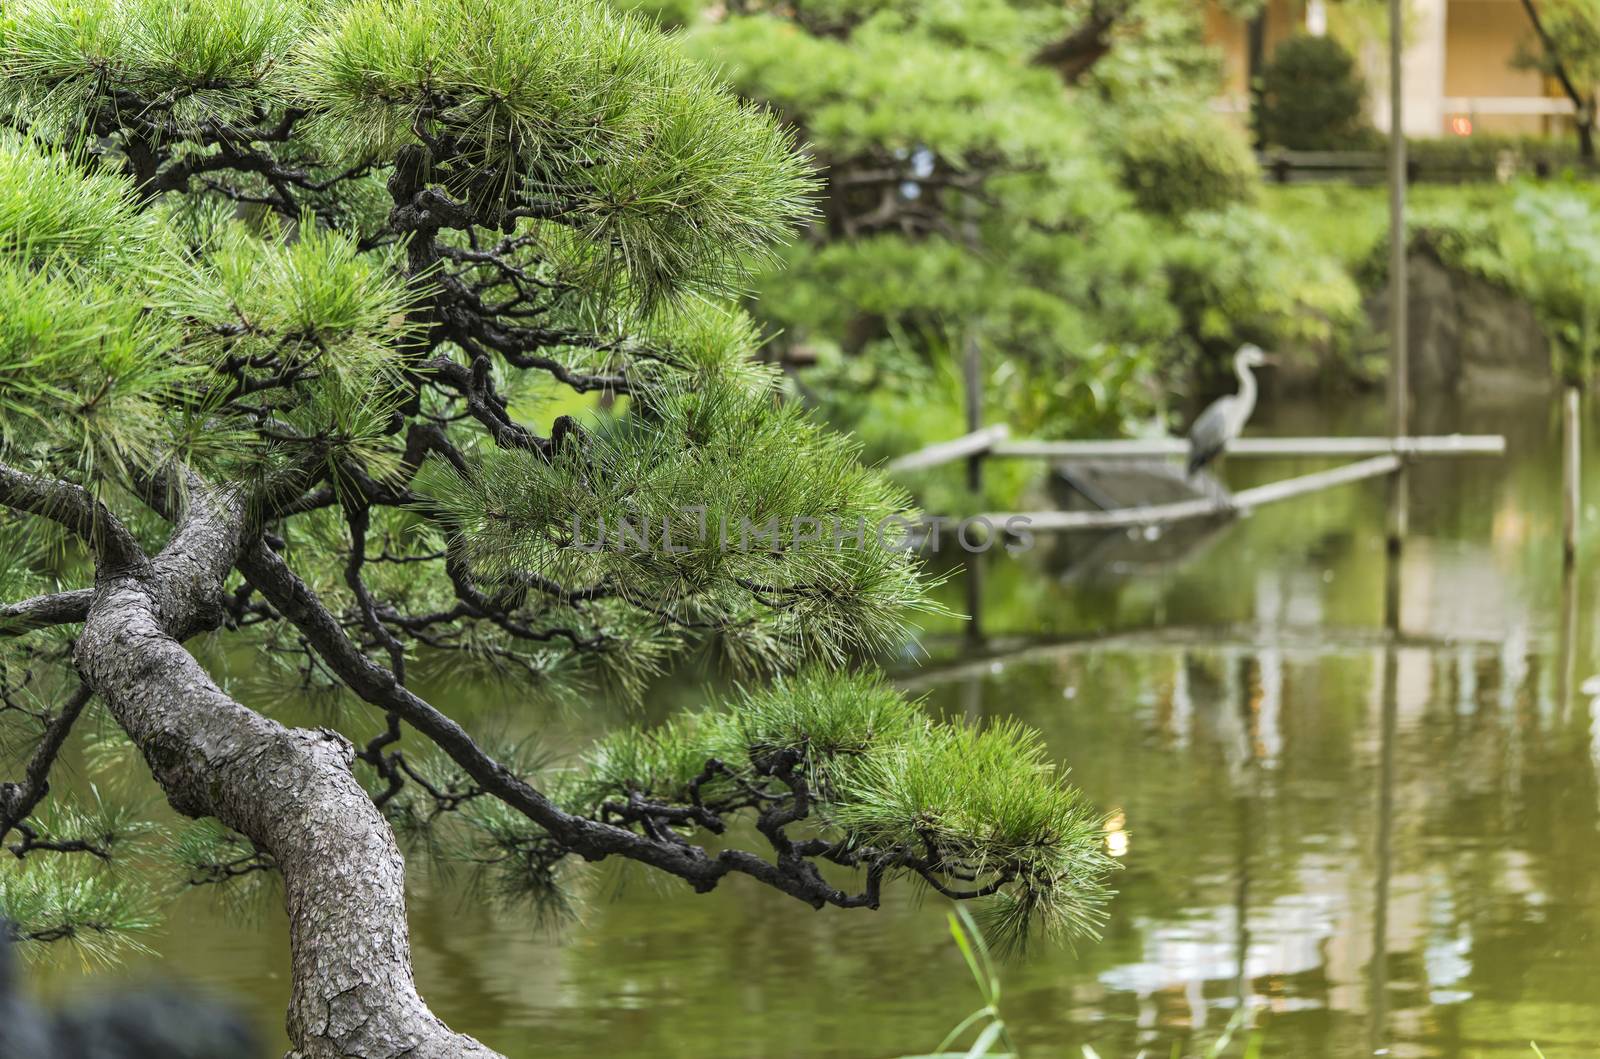 Pine tree and Japanese heron in the Shinji Pond in the public garden of Hibiya Park bordering the southern moat of the Imperial Palace. The word Shinji is composed of 2 ideograms which are the heart and the form. This type of lake whose contours follow the shape of the ideogram "heart" has several examples in the country.